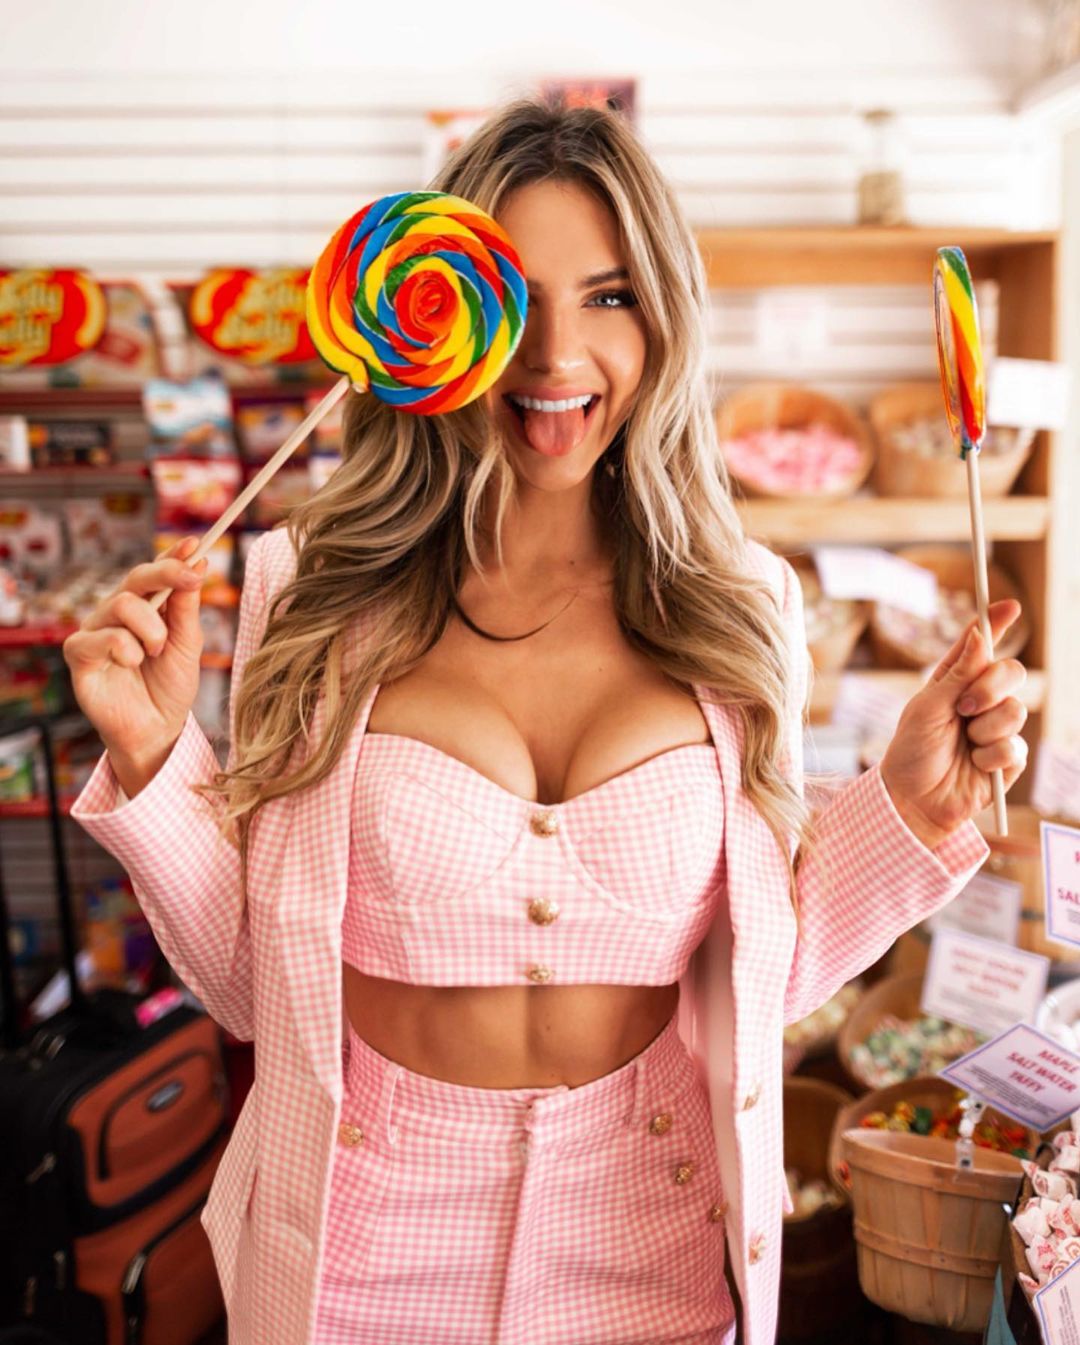 Sweet tooth What is your favorite candy • • • Sweet tooth What is your favorite candy?! •••••: